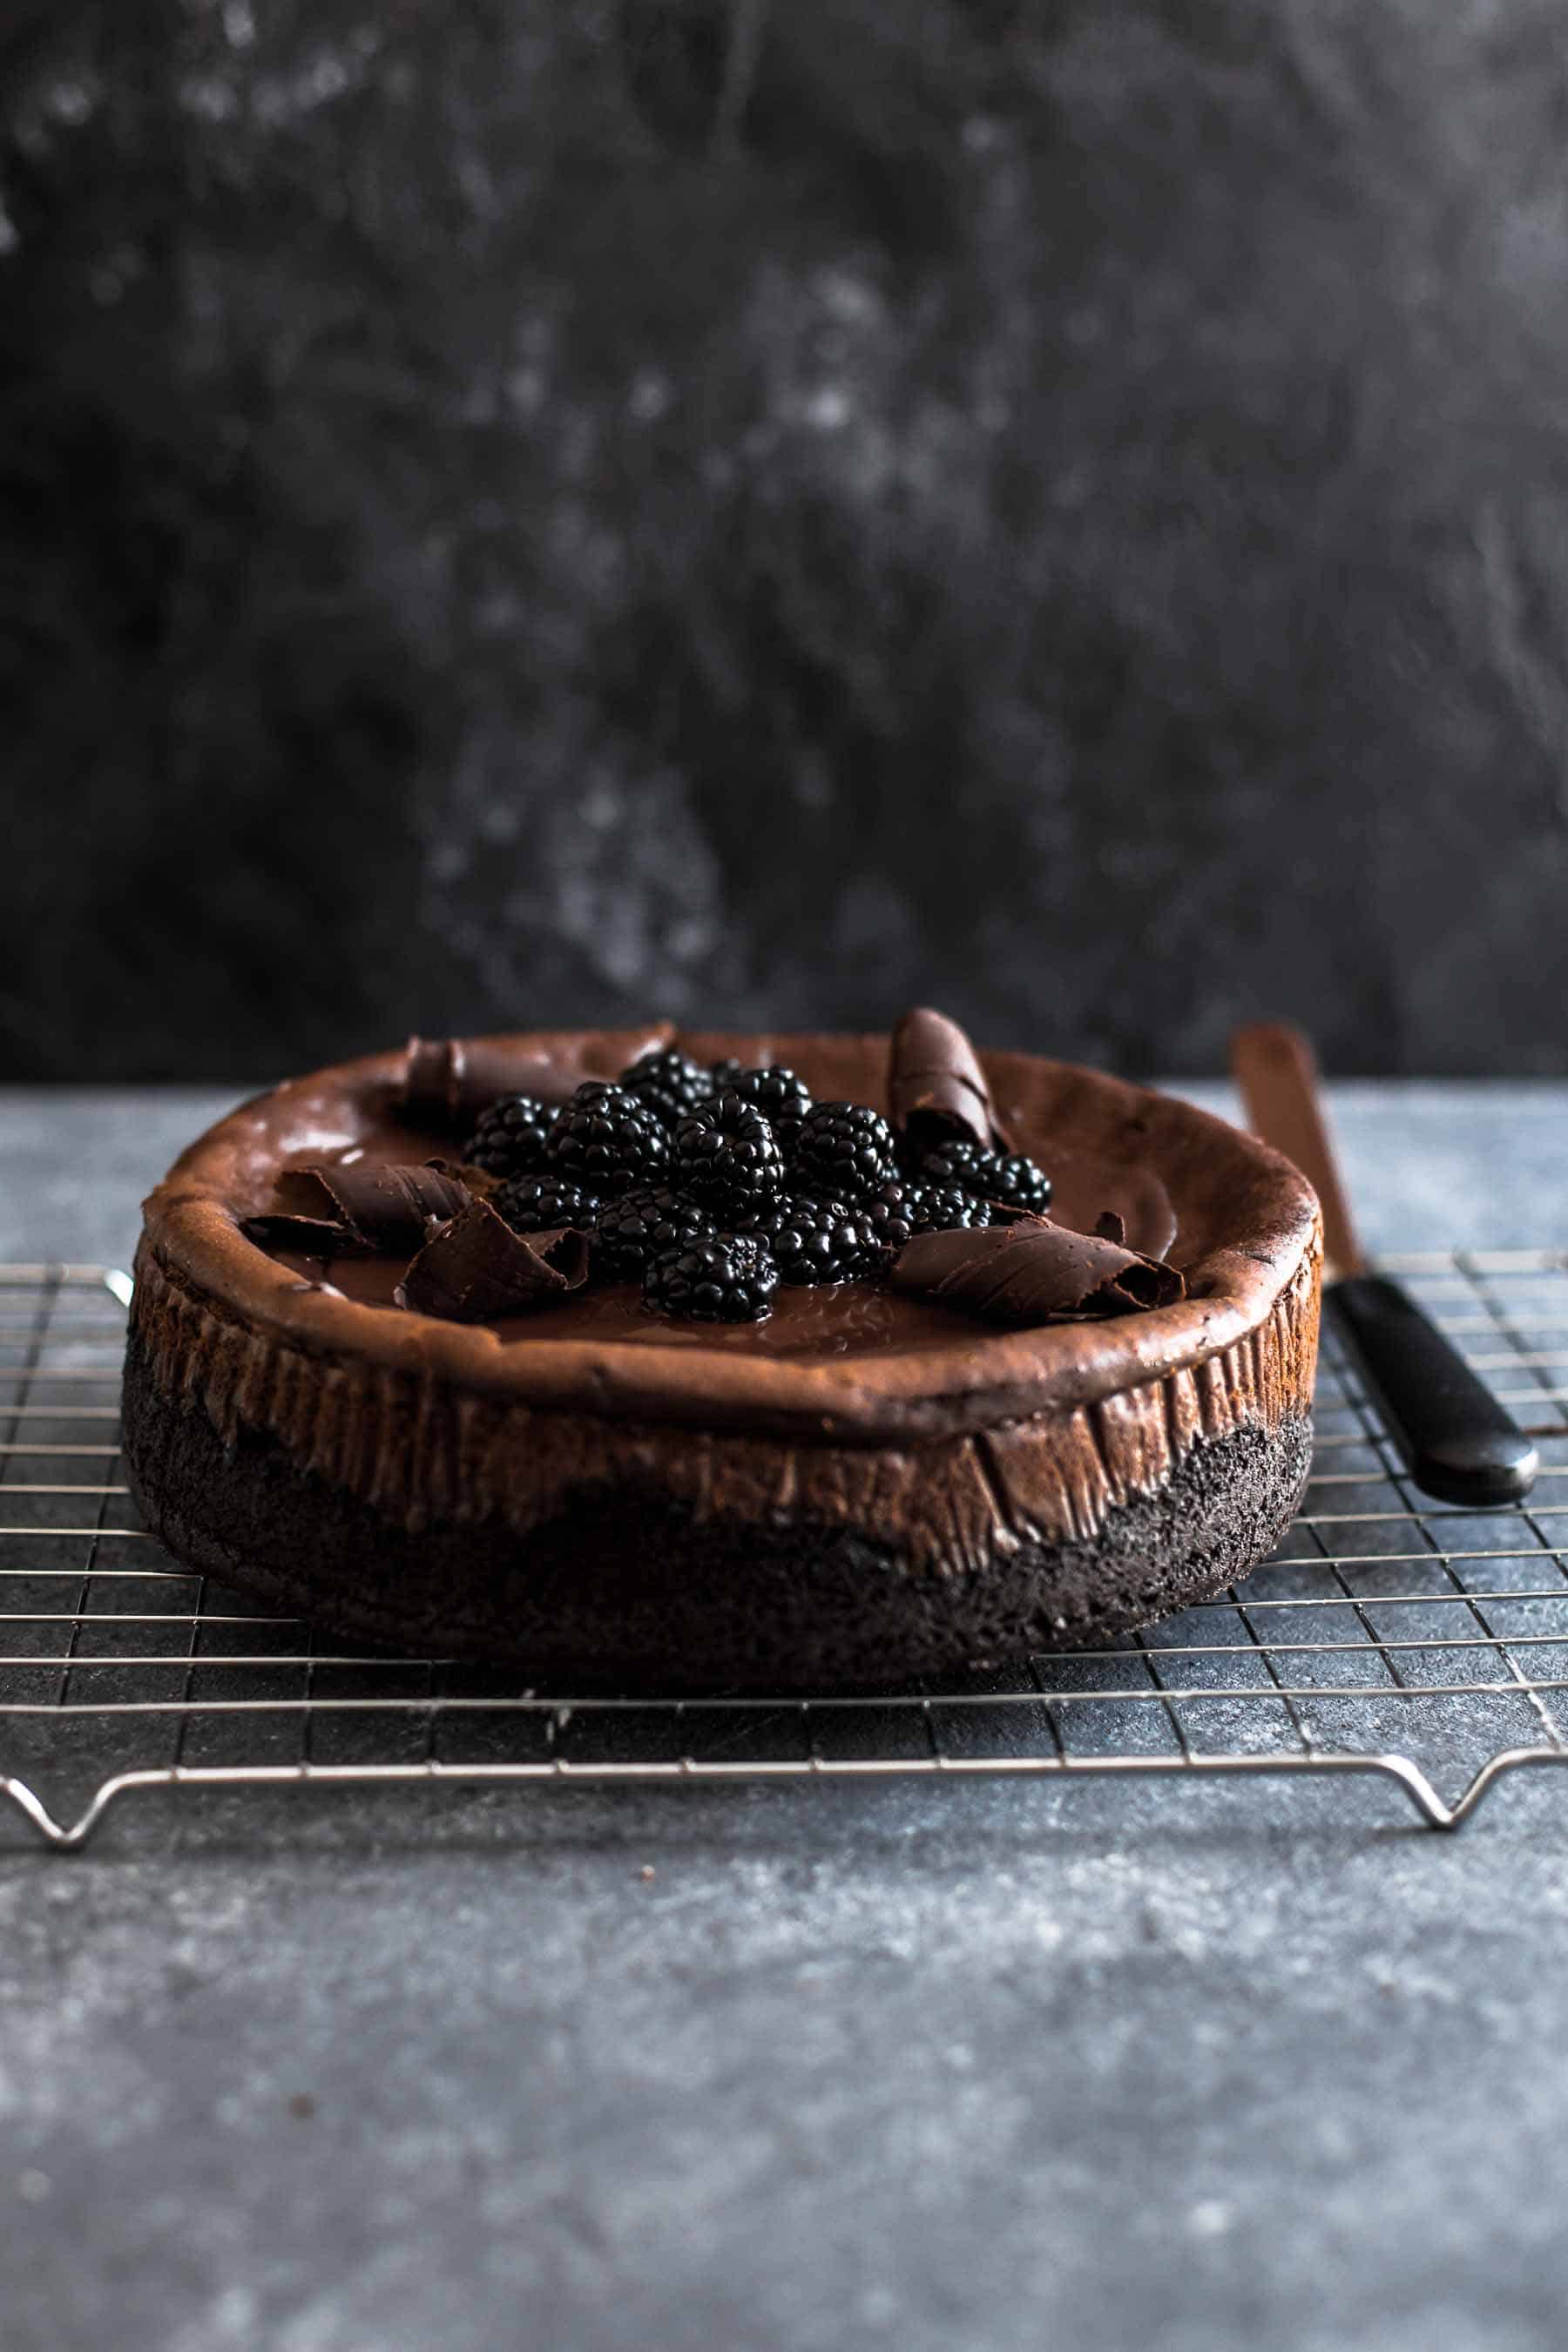 baked chocolate cheesecake on wire rack with Chocolate shavings and blackberries on top